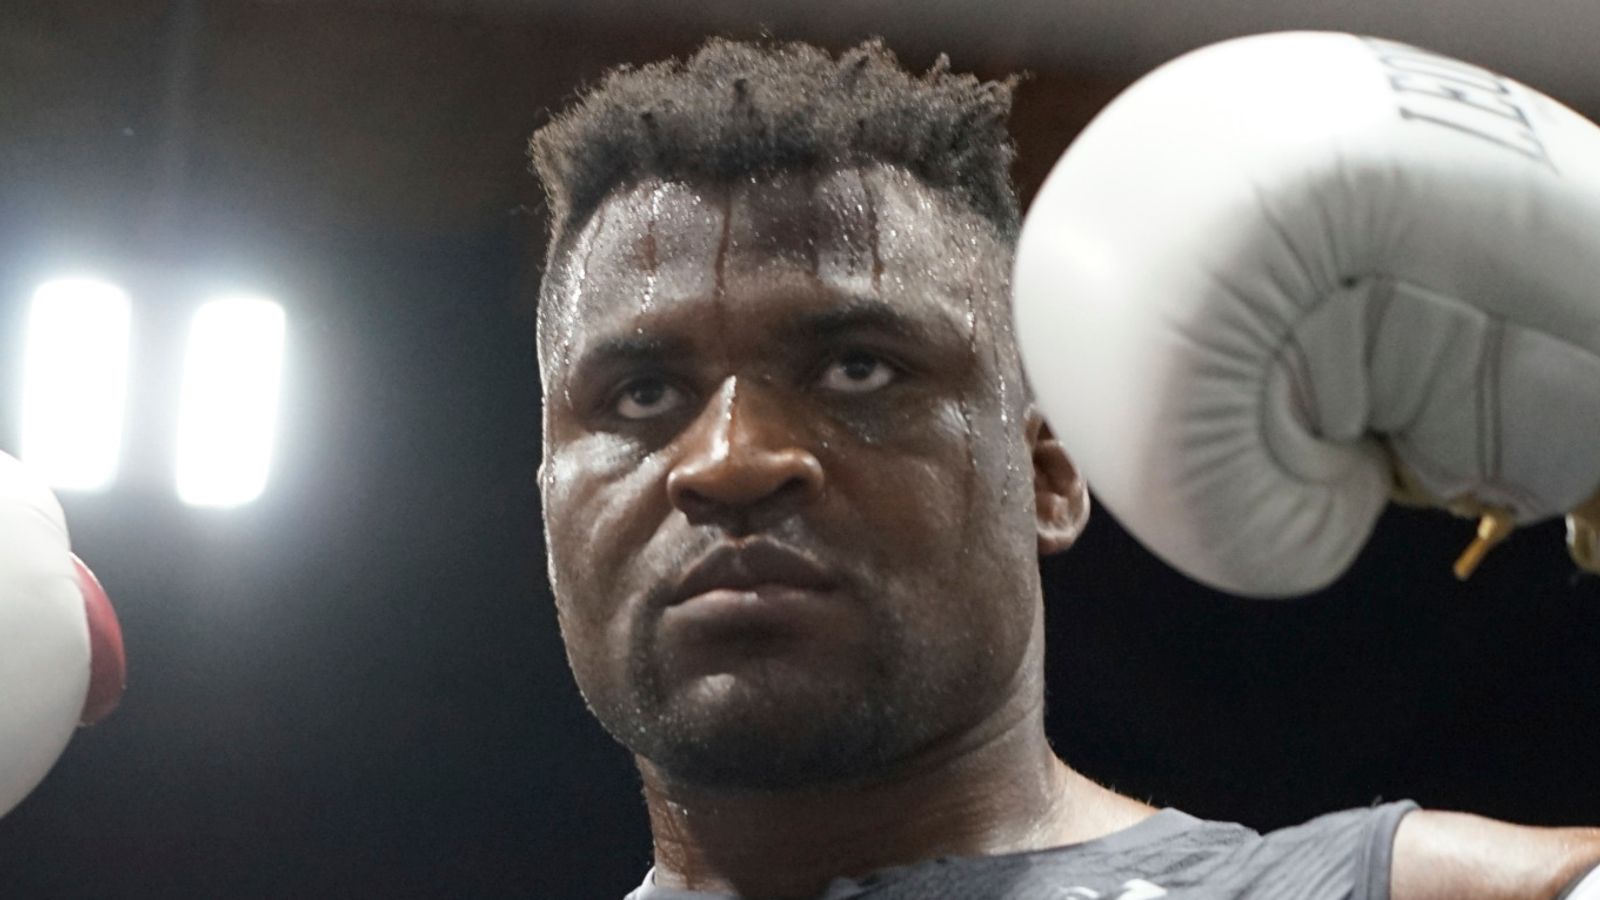 Francis Ngannou: Boxing and MMA fighter mourns death of 15-month-old son Kobe | WWE News